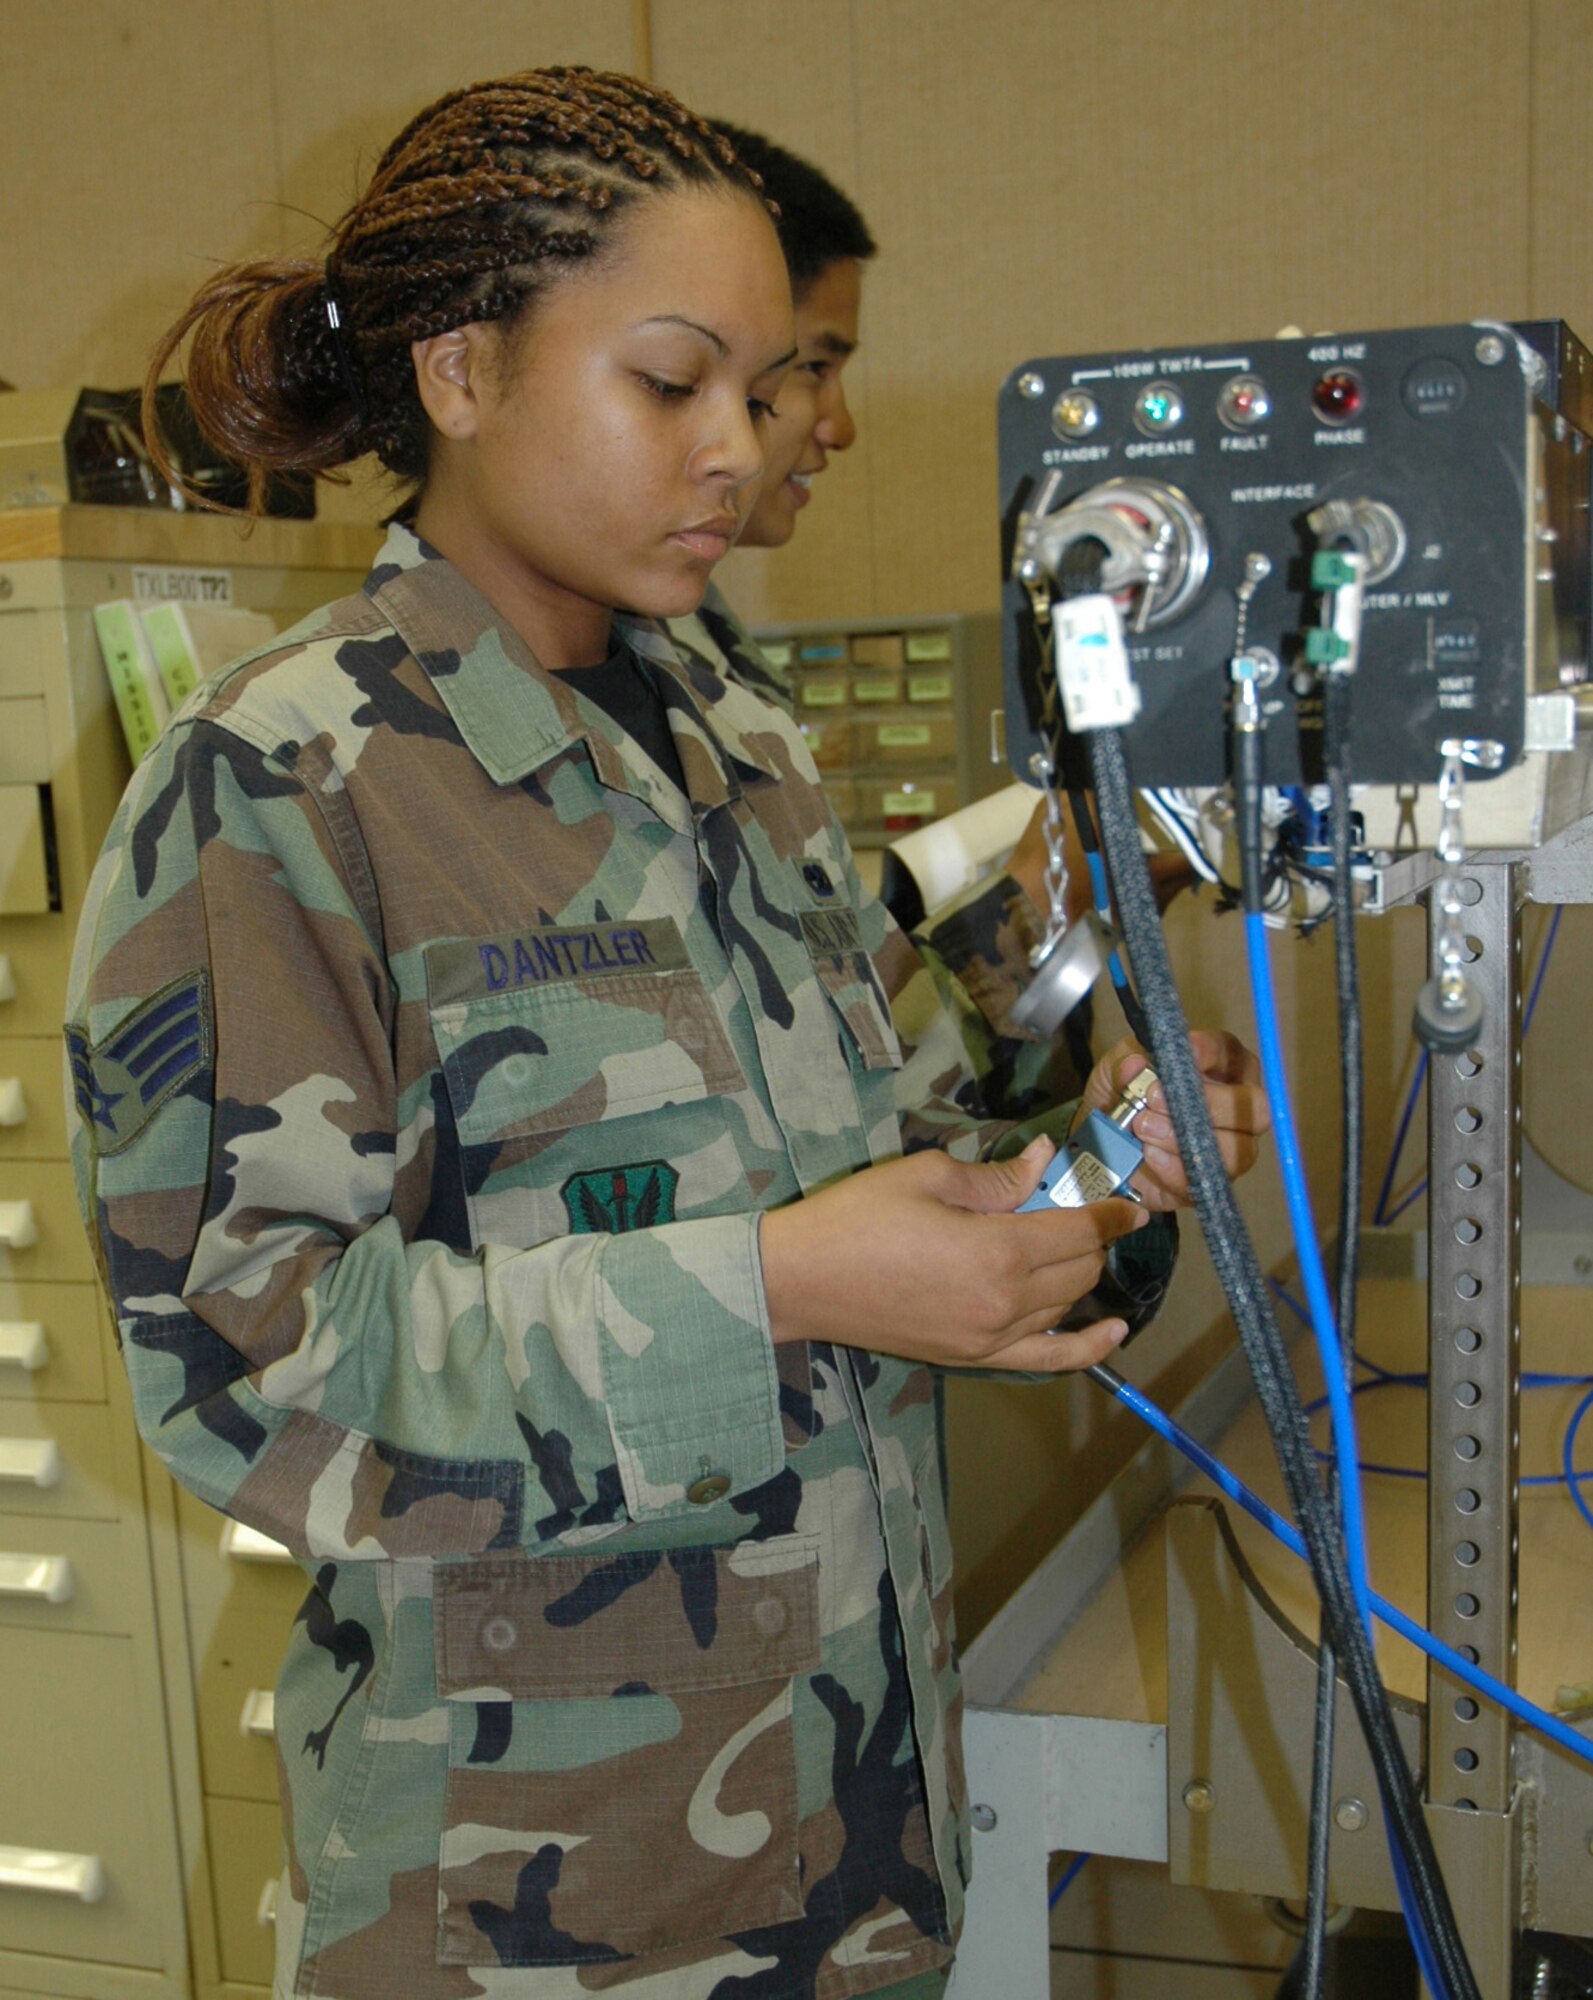 TYNDALL AIR FORCE BASE, Fla. (AETCNS) -- Senior Airman Jennifer Dantzler, 28th Test Squadron/Detachment 2 electronic warfare technician, hooks up wires to an electronic warfare defense pod used on Air Force fighter jets. The squadron, one of Tyndall’s tenant units, won the Air Force Association’s 2006 Theodore Von Karman Award for outstanding contributions to national defense in the field of science and engineering related to aerospace activities. Electronic warfare systems and its associated capabilities are part of more than 400 test missions in support of 17 programs accomplished in 2006 across the combat Air Forces. Specifically, the pod in the picture is an essential tool for testing and training on F-15 and F-16 aircraft radar and avionics suites. (U.S. Air Force photo by Chrissy Cuttita) 